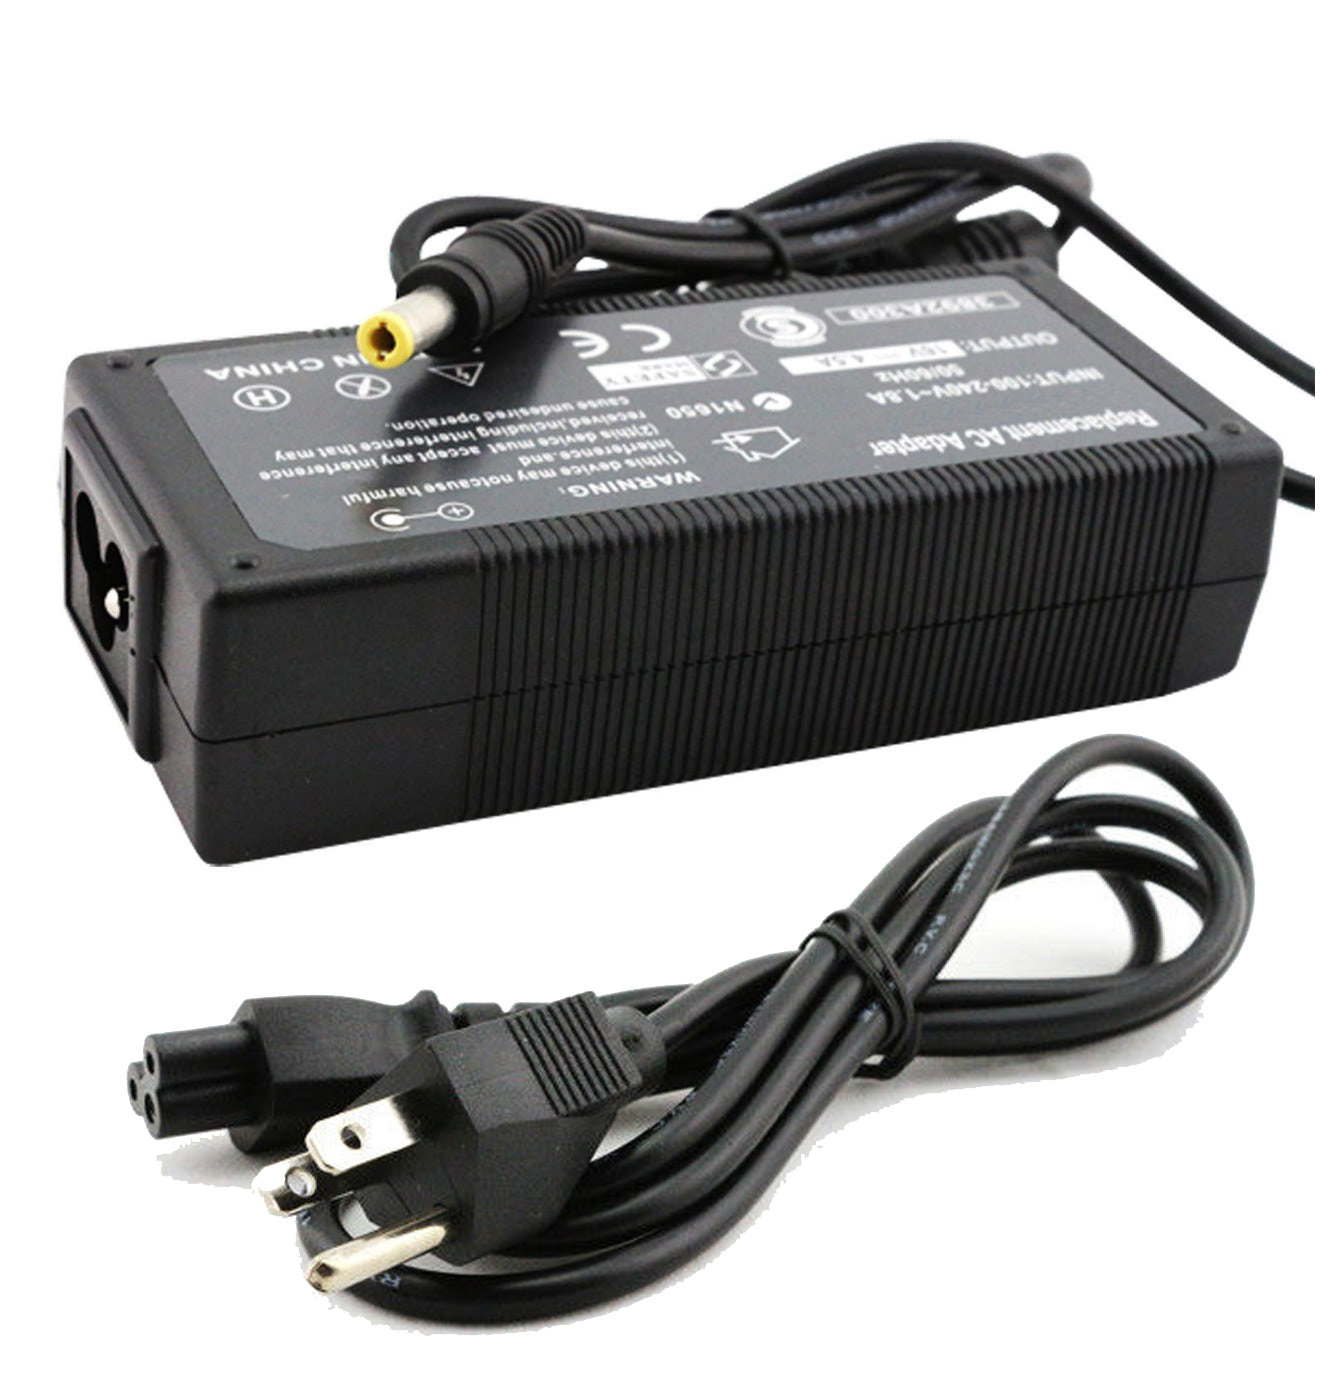 AC Adapter Charger for Panasonic Toughbook CF-29 Notebook.